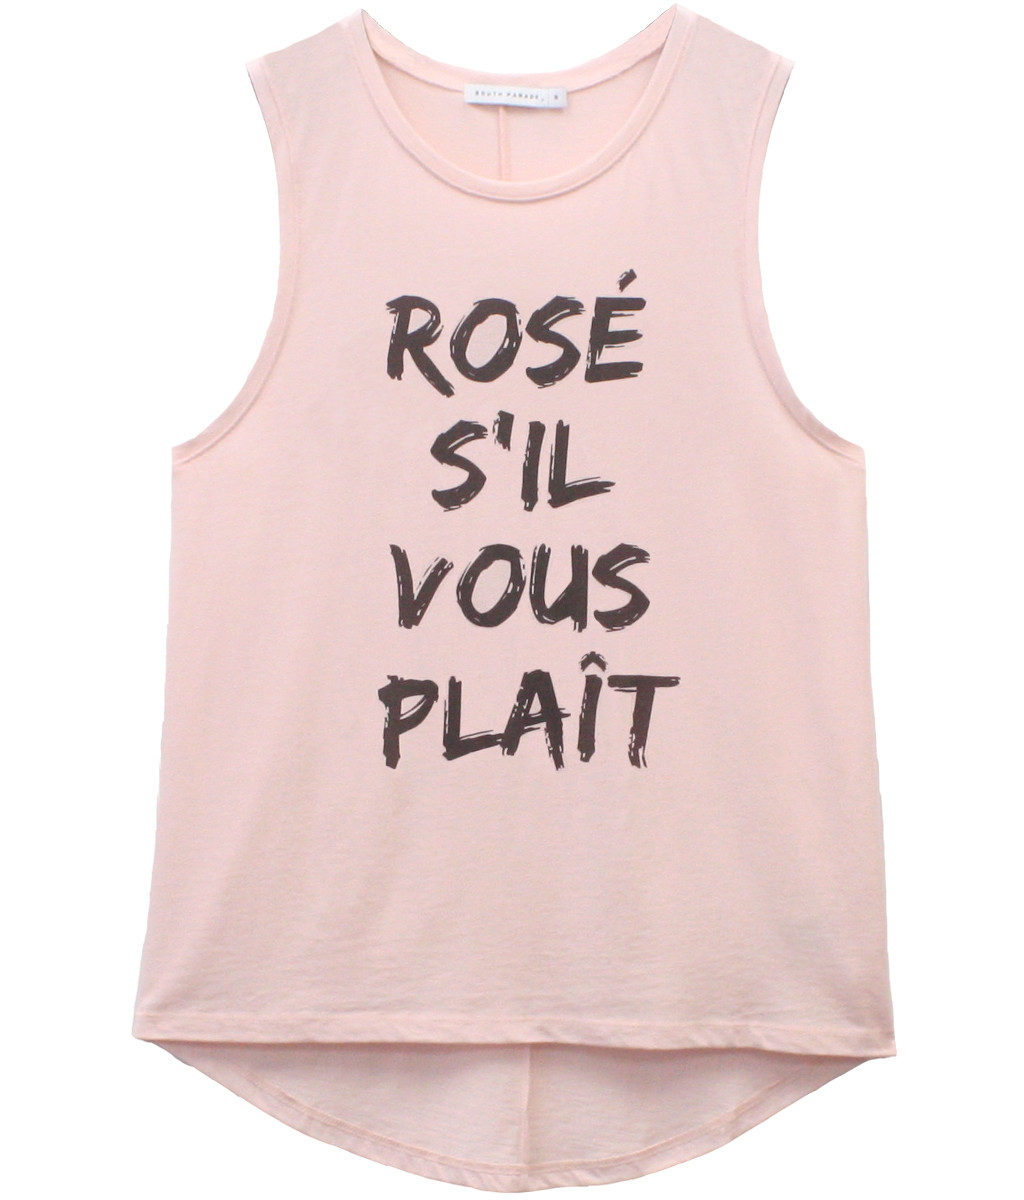 South-Parade-Muscle-Tee-Rose-Sil-Vous-Plait-Pink-T-shirt.jpg